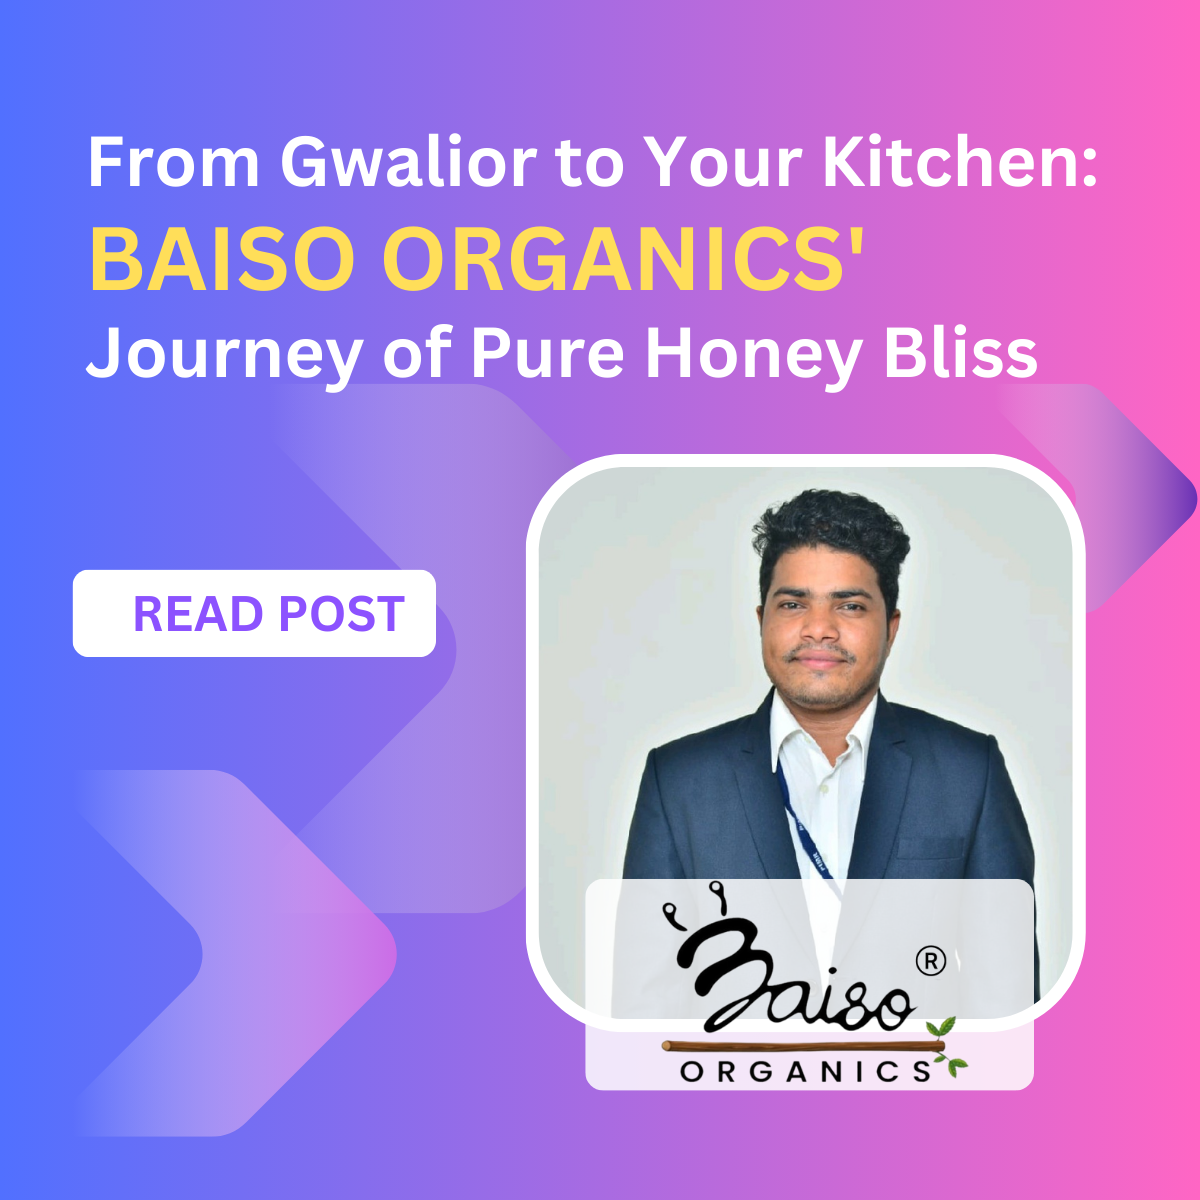 From Gwalior to your Kitchen: Baiso Organics' Journey of pure Honey Bliss